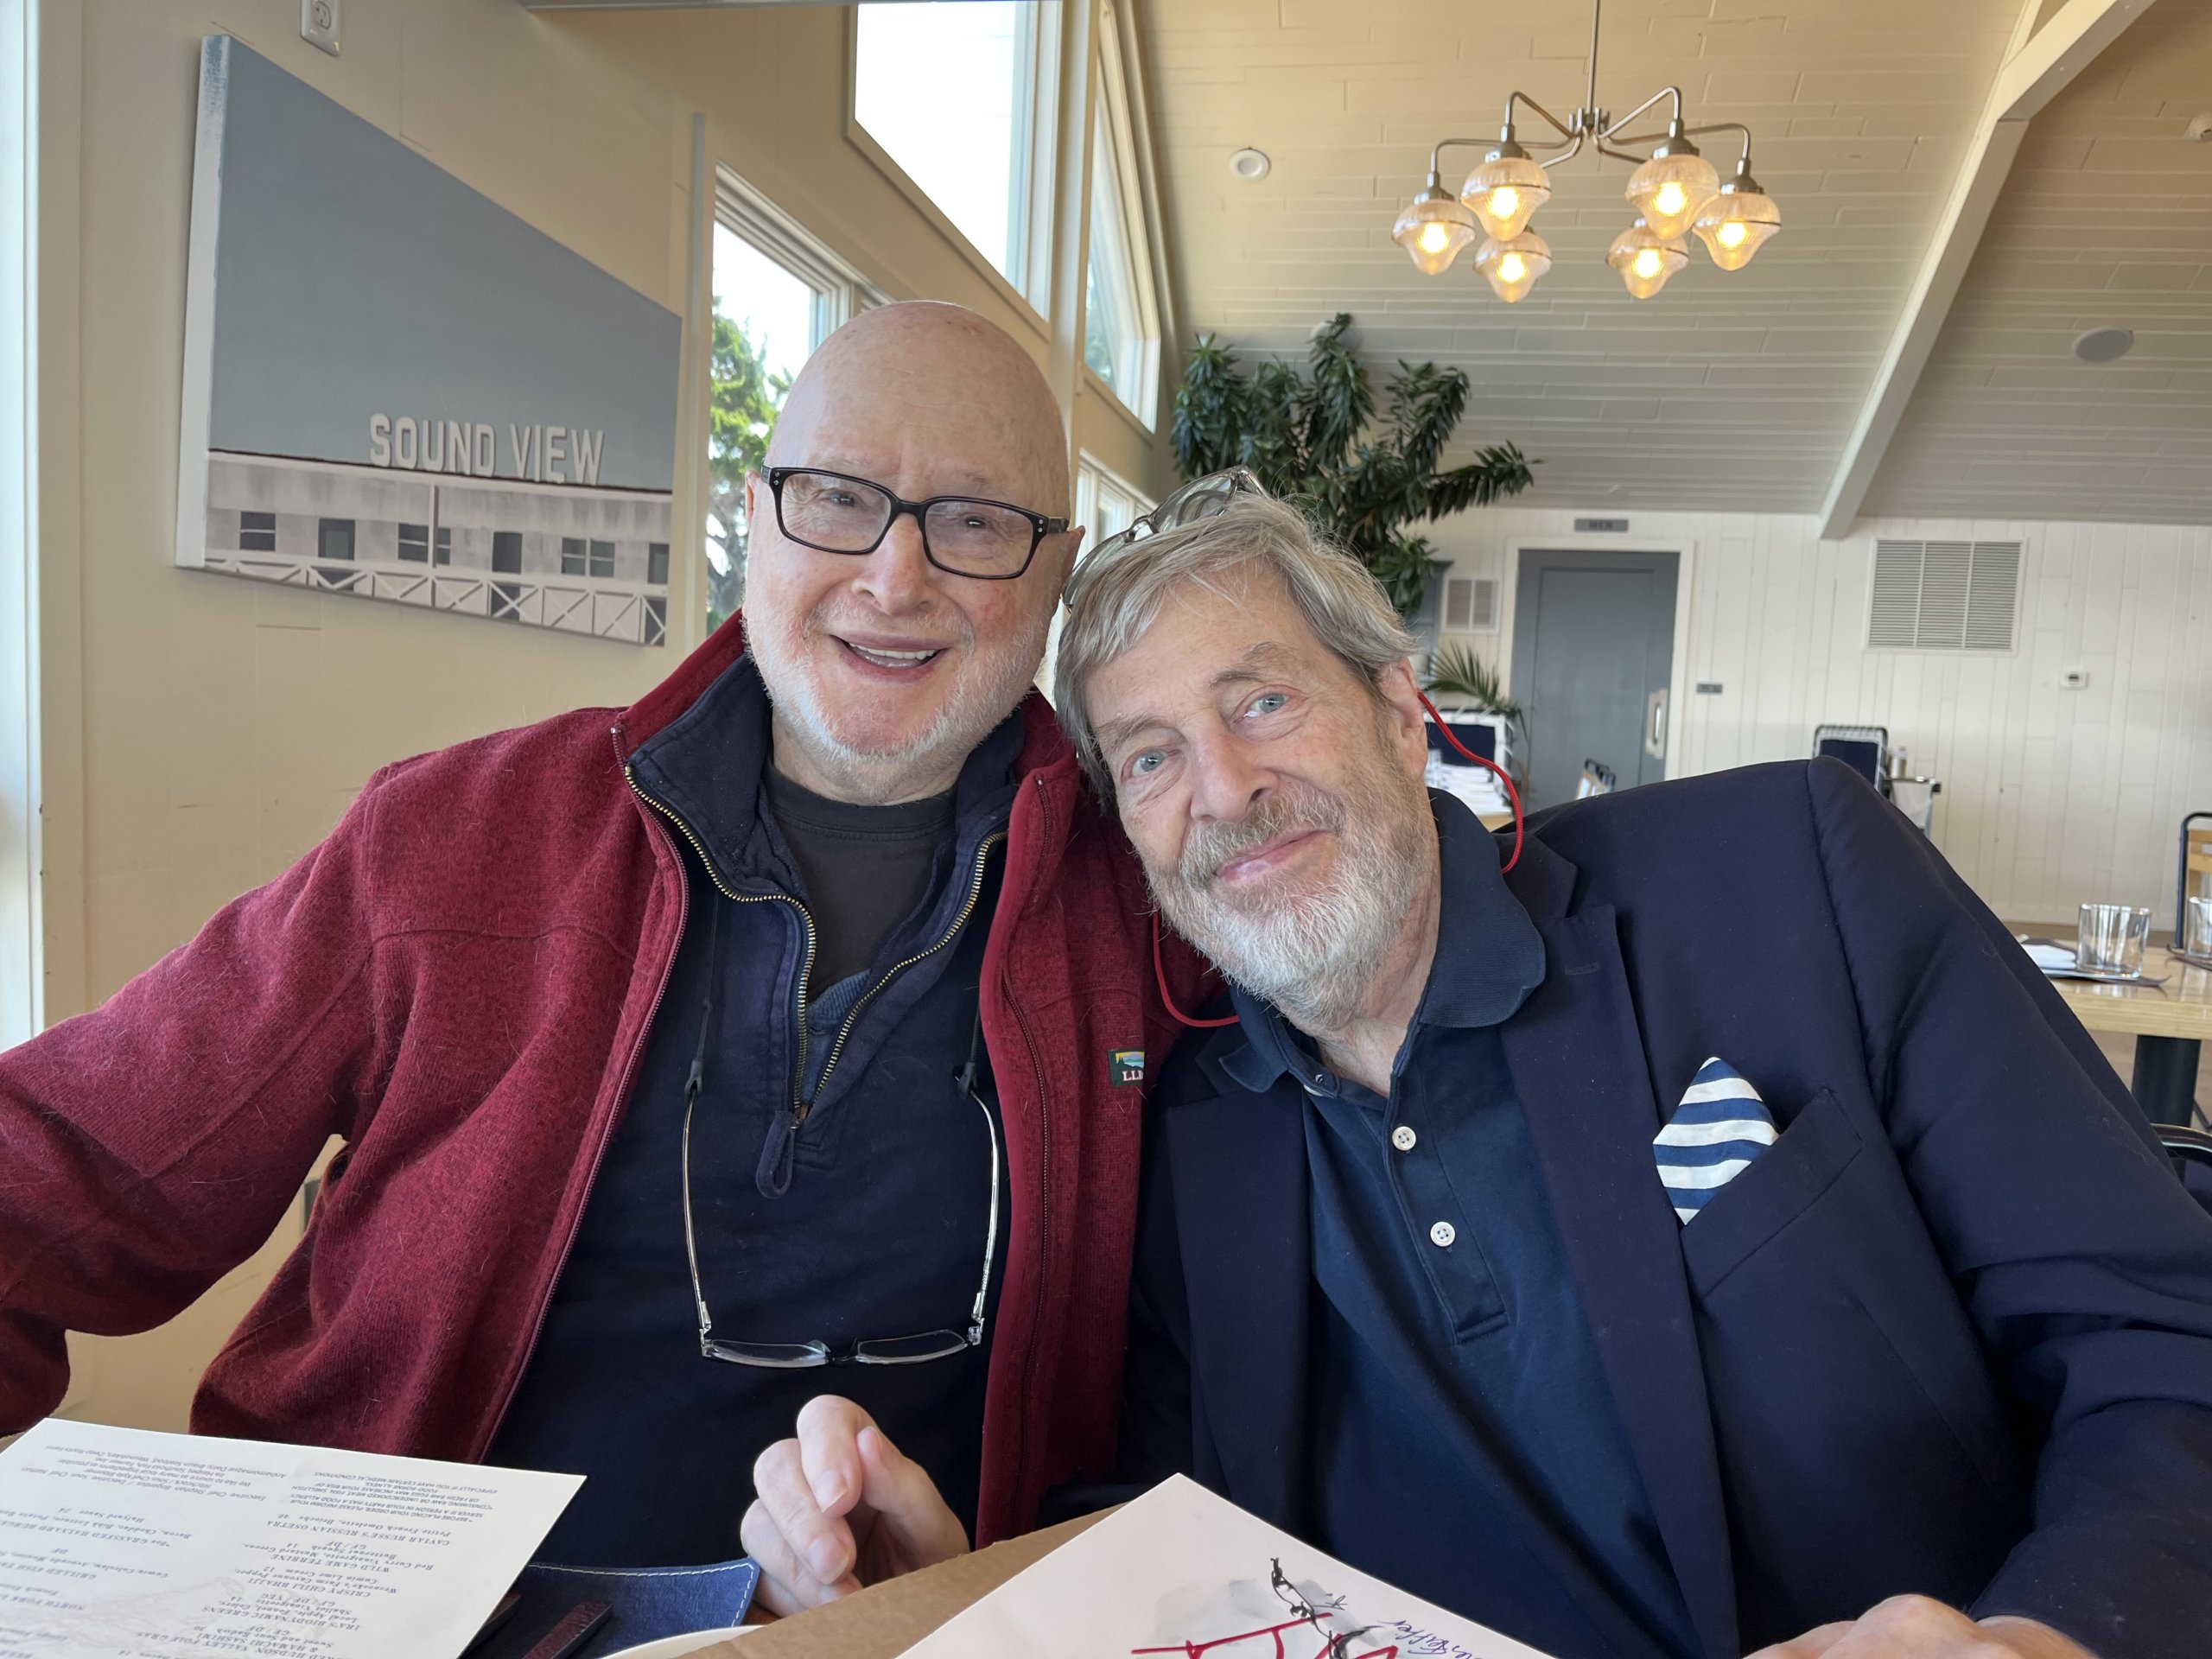 Tony Walton and Jules Feiffer at the Sound View in Greenport for Walton's last birthday, October 24, 2021